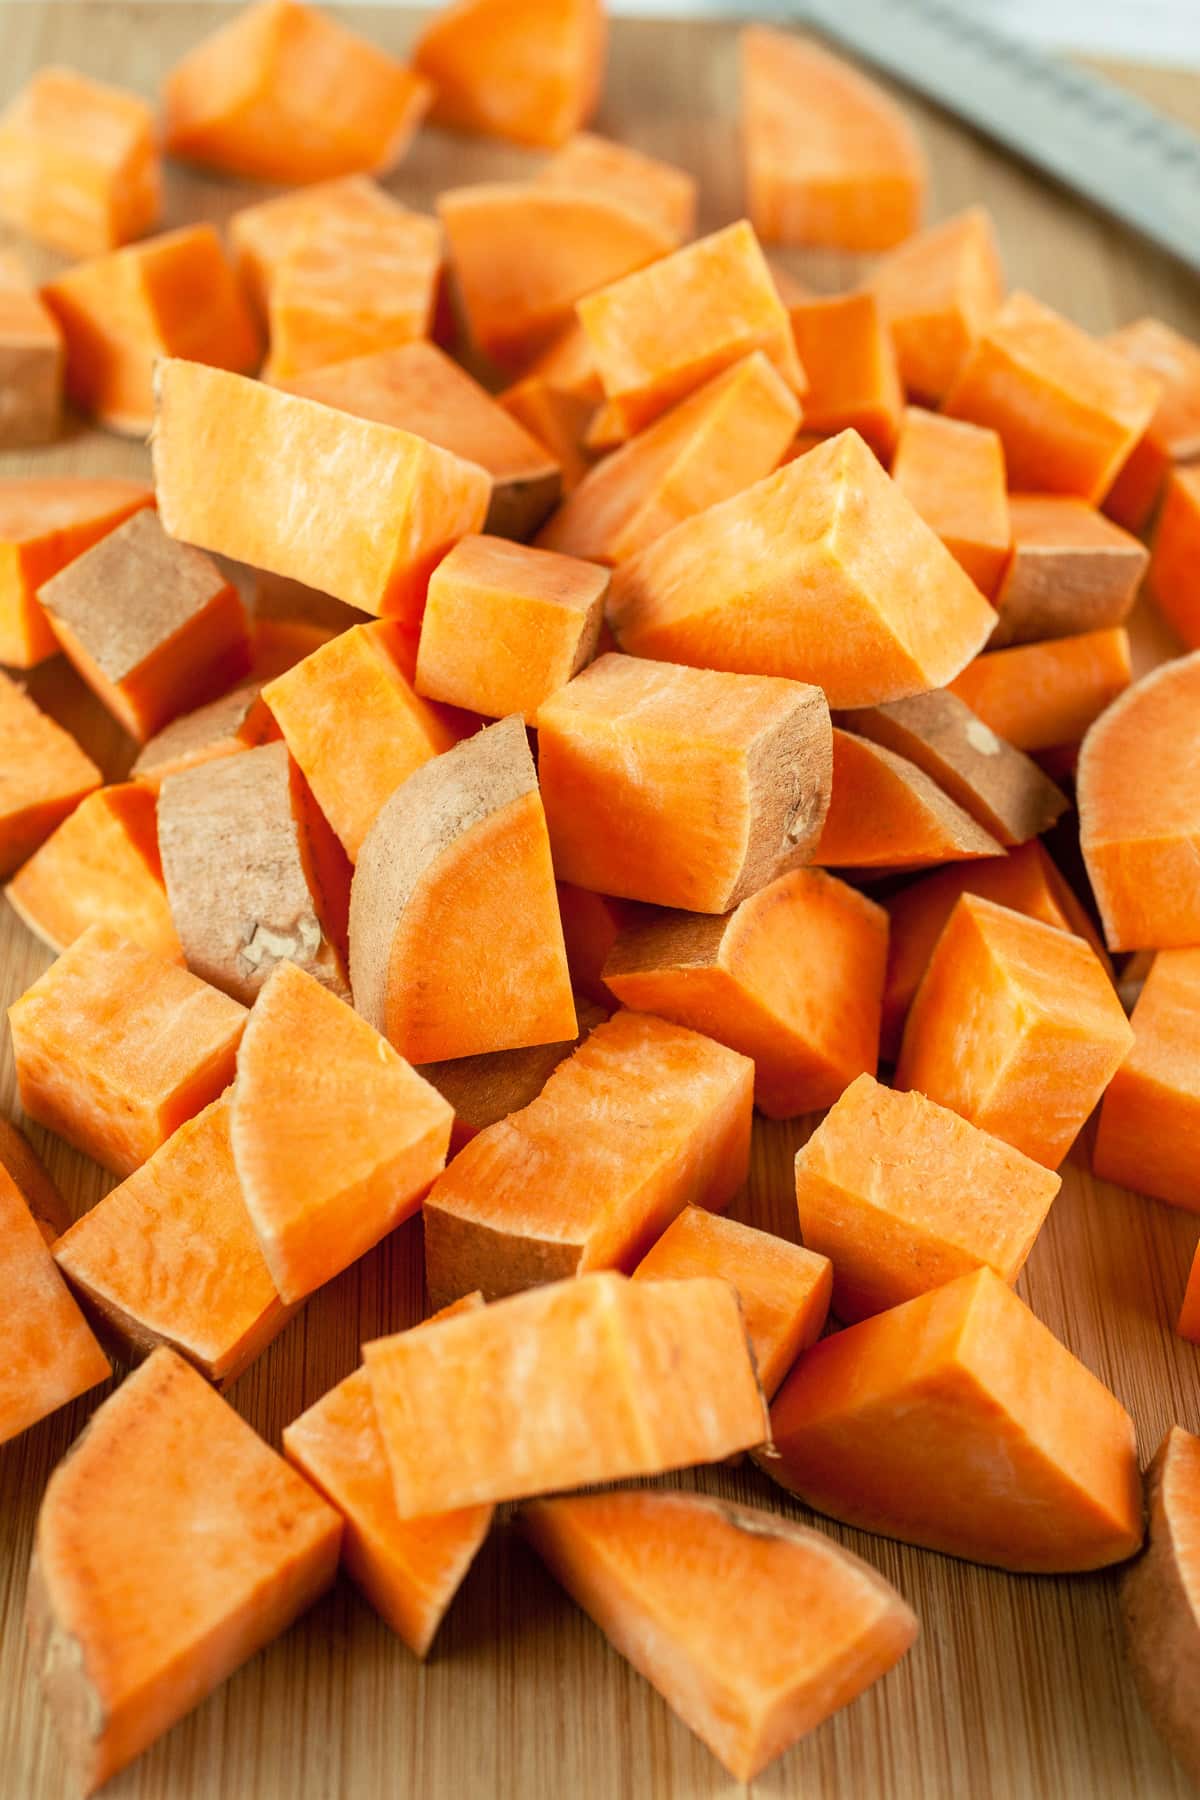 Diced sweet potatoes on wooden cutting board.